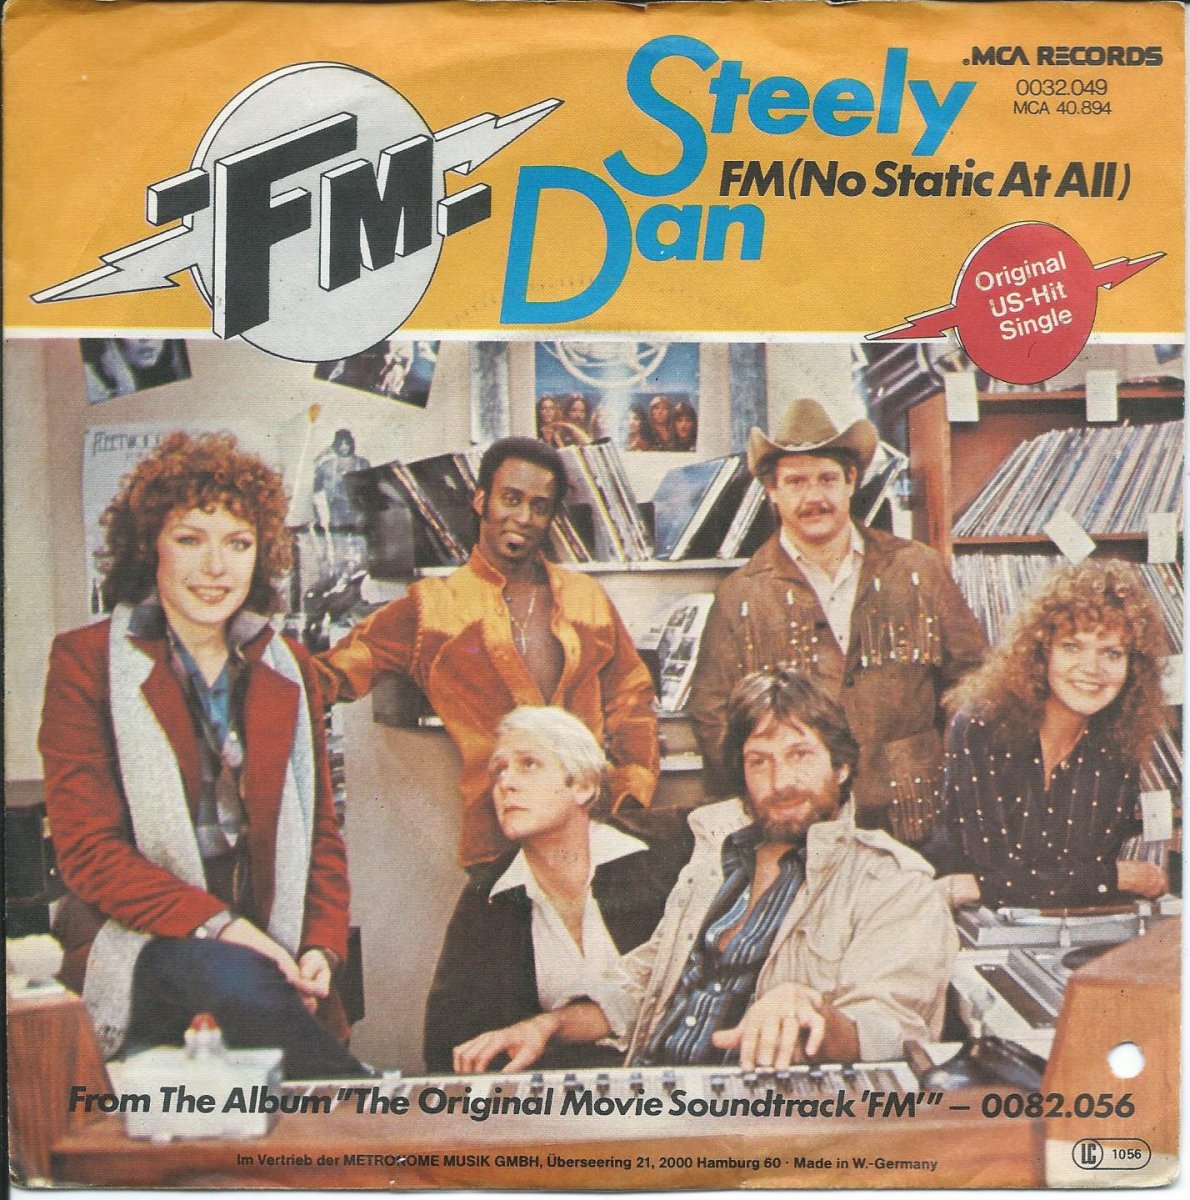 STEELY DAN / FM (NO STATIC AT ALL) (7